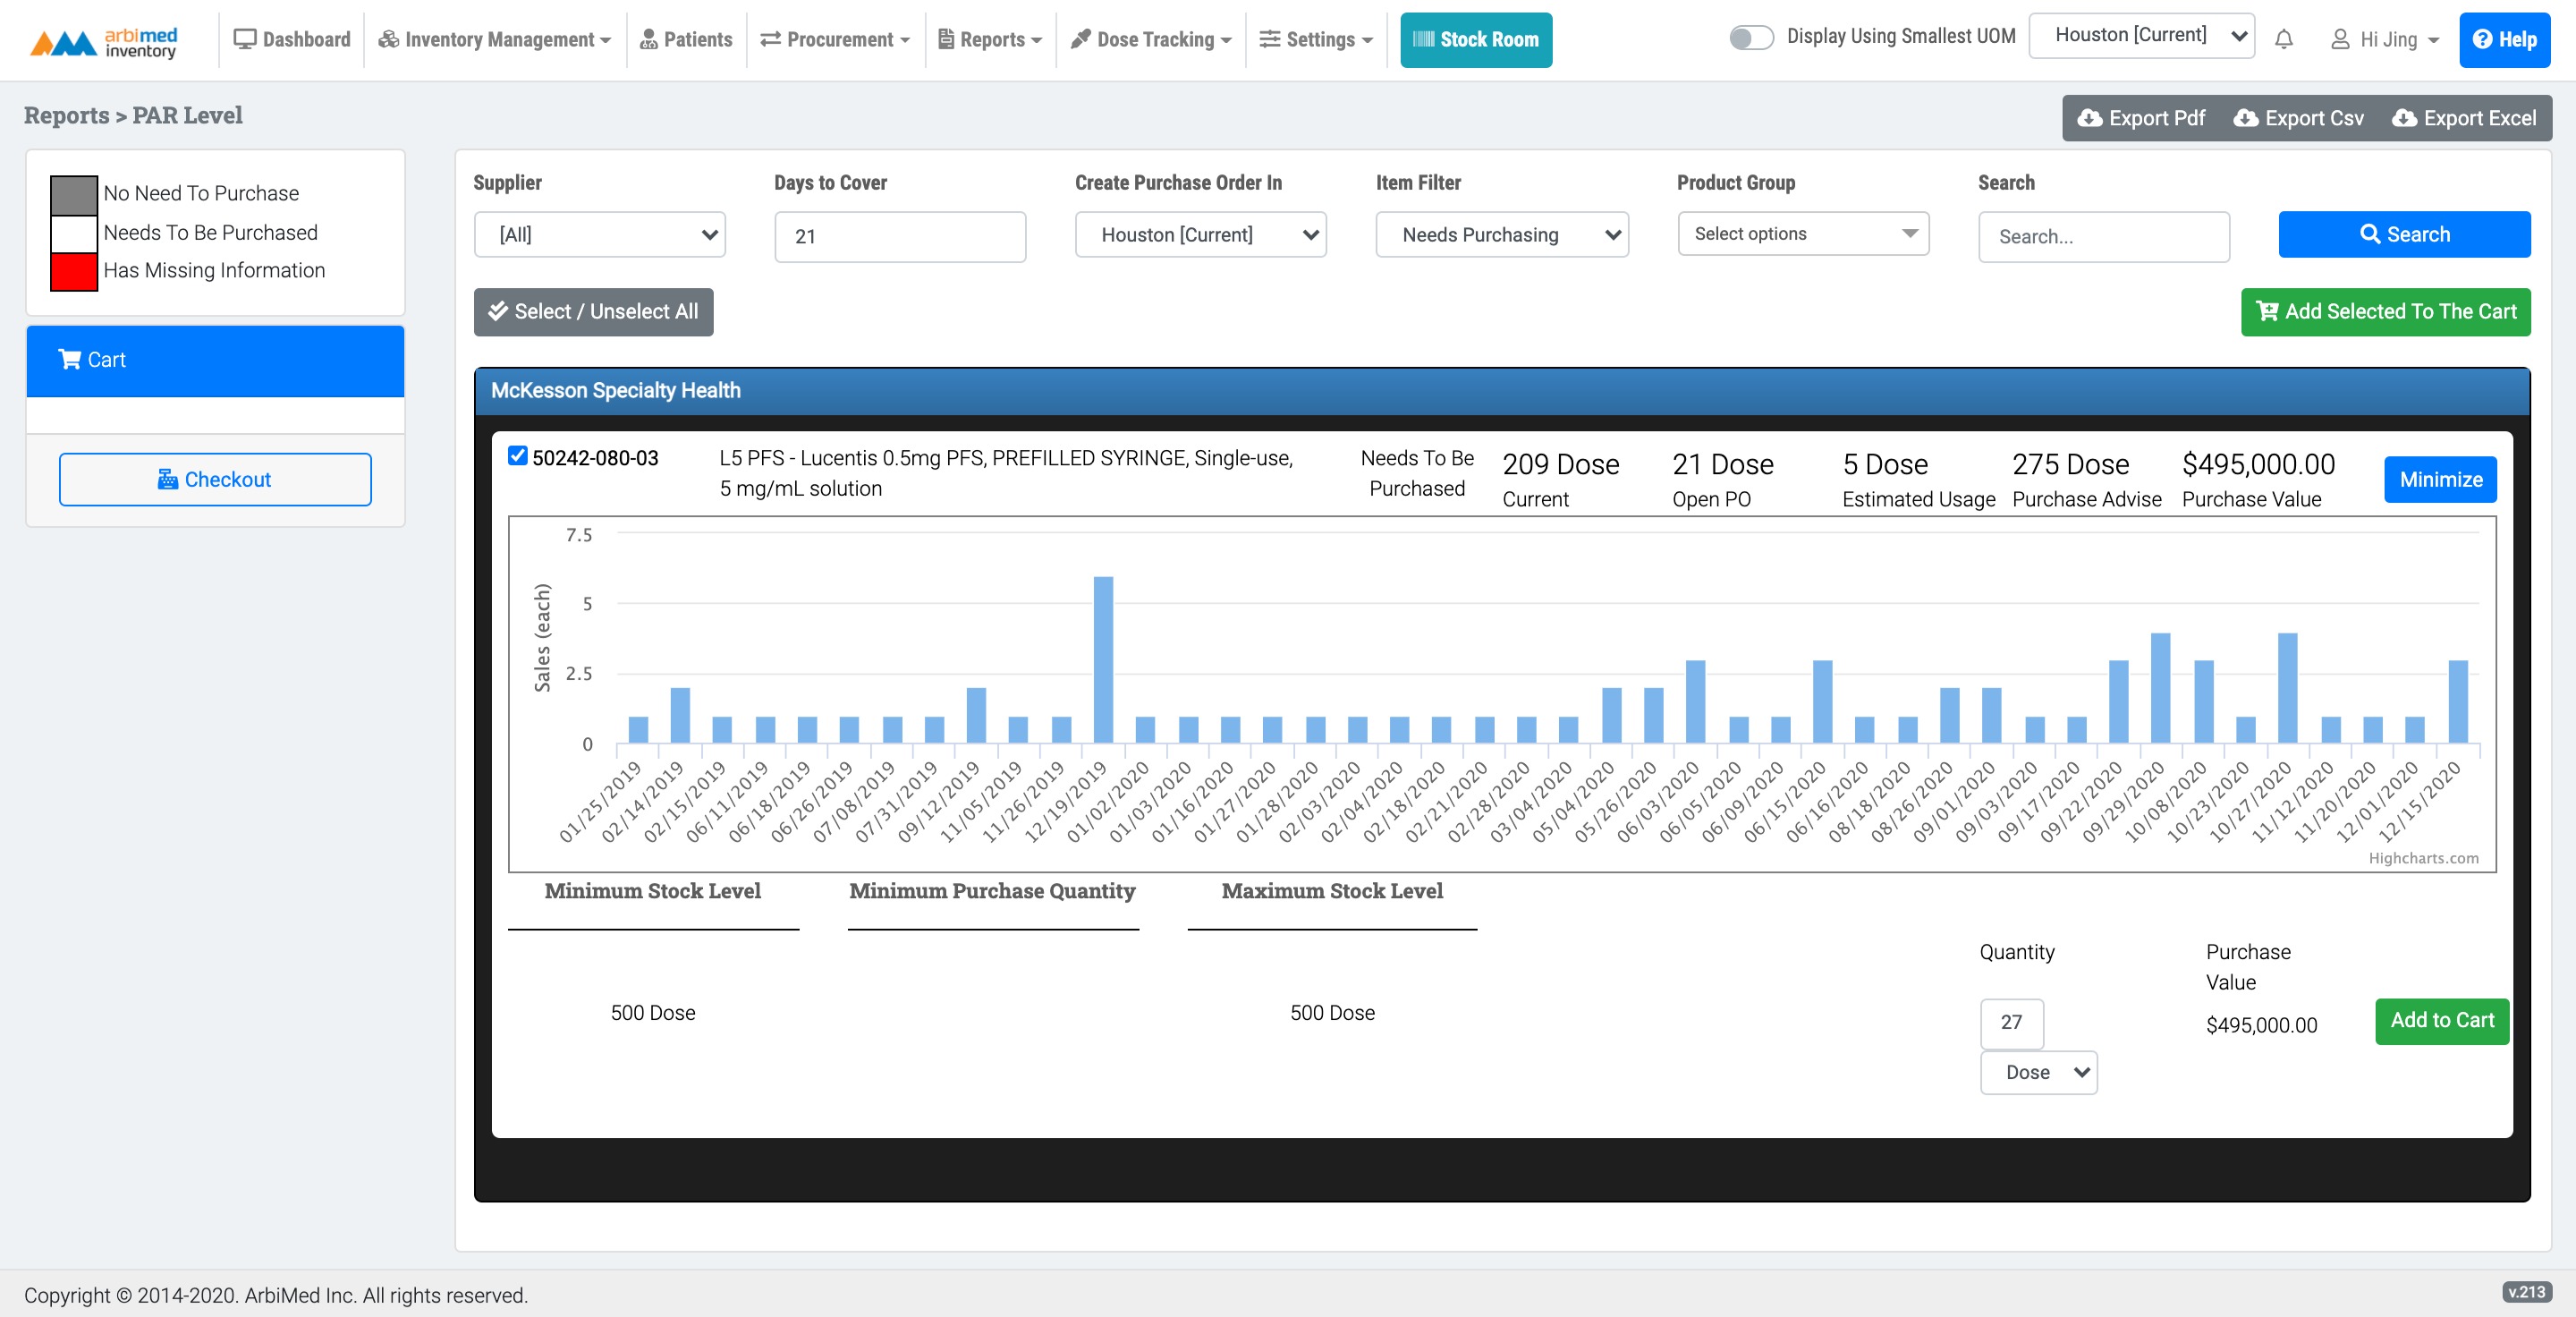 Par Level Report - Review the status of par level items, get insights from meaningful data to make purchasing decisions